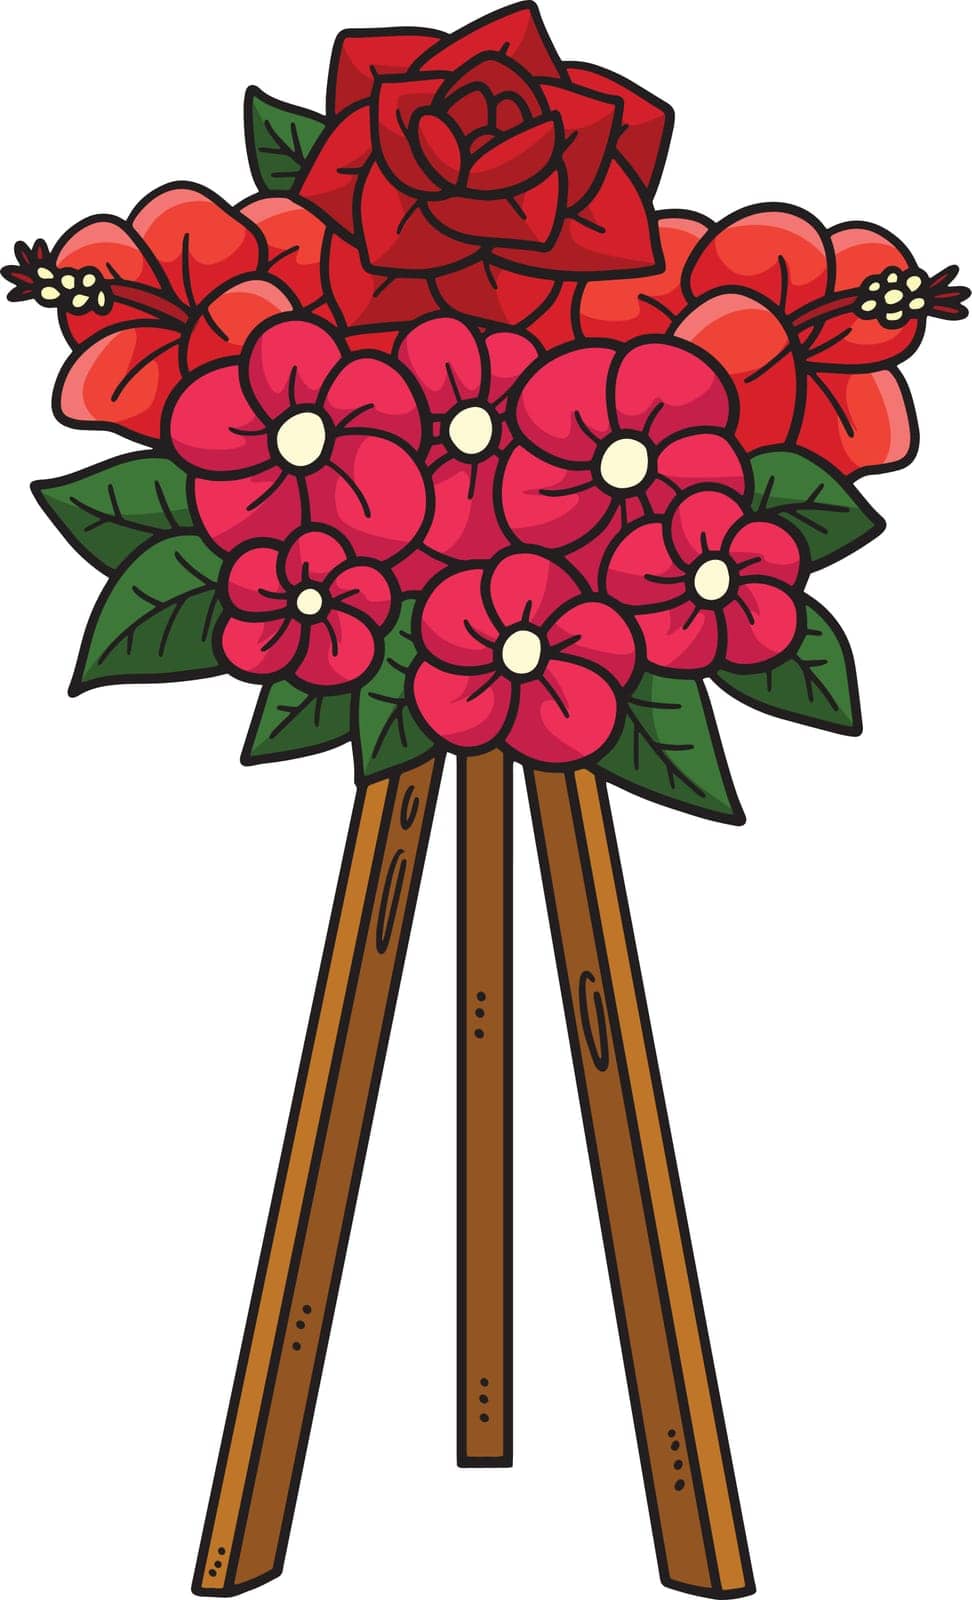 This cartoon clipart shows a Flower Standee illustration